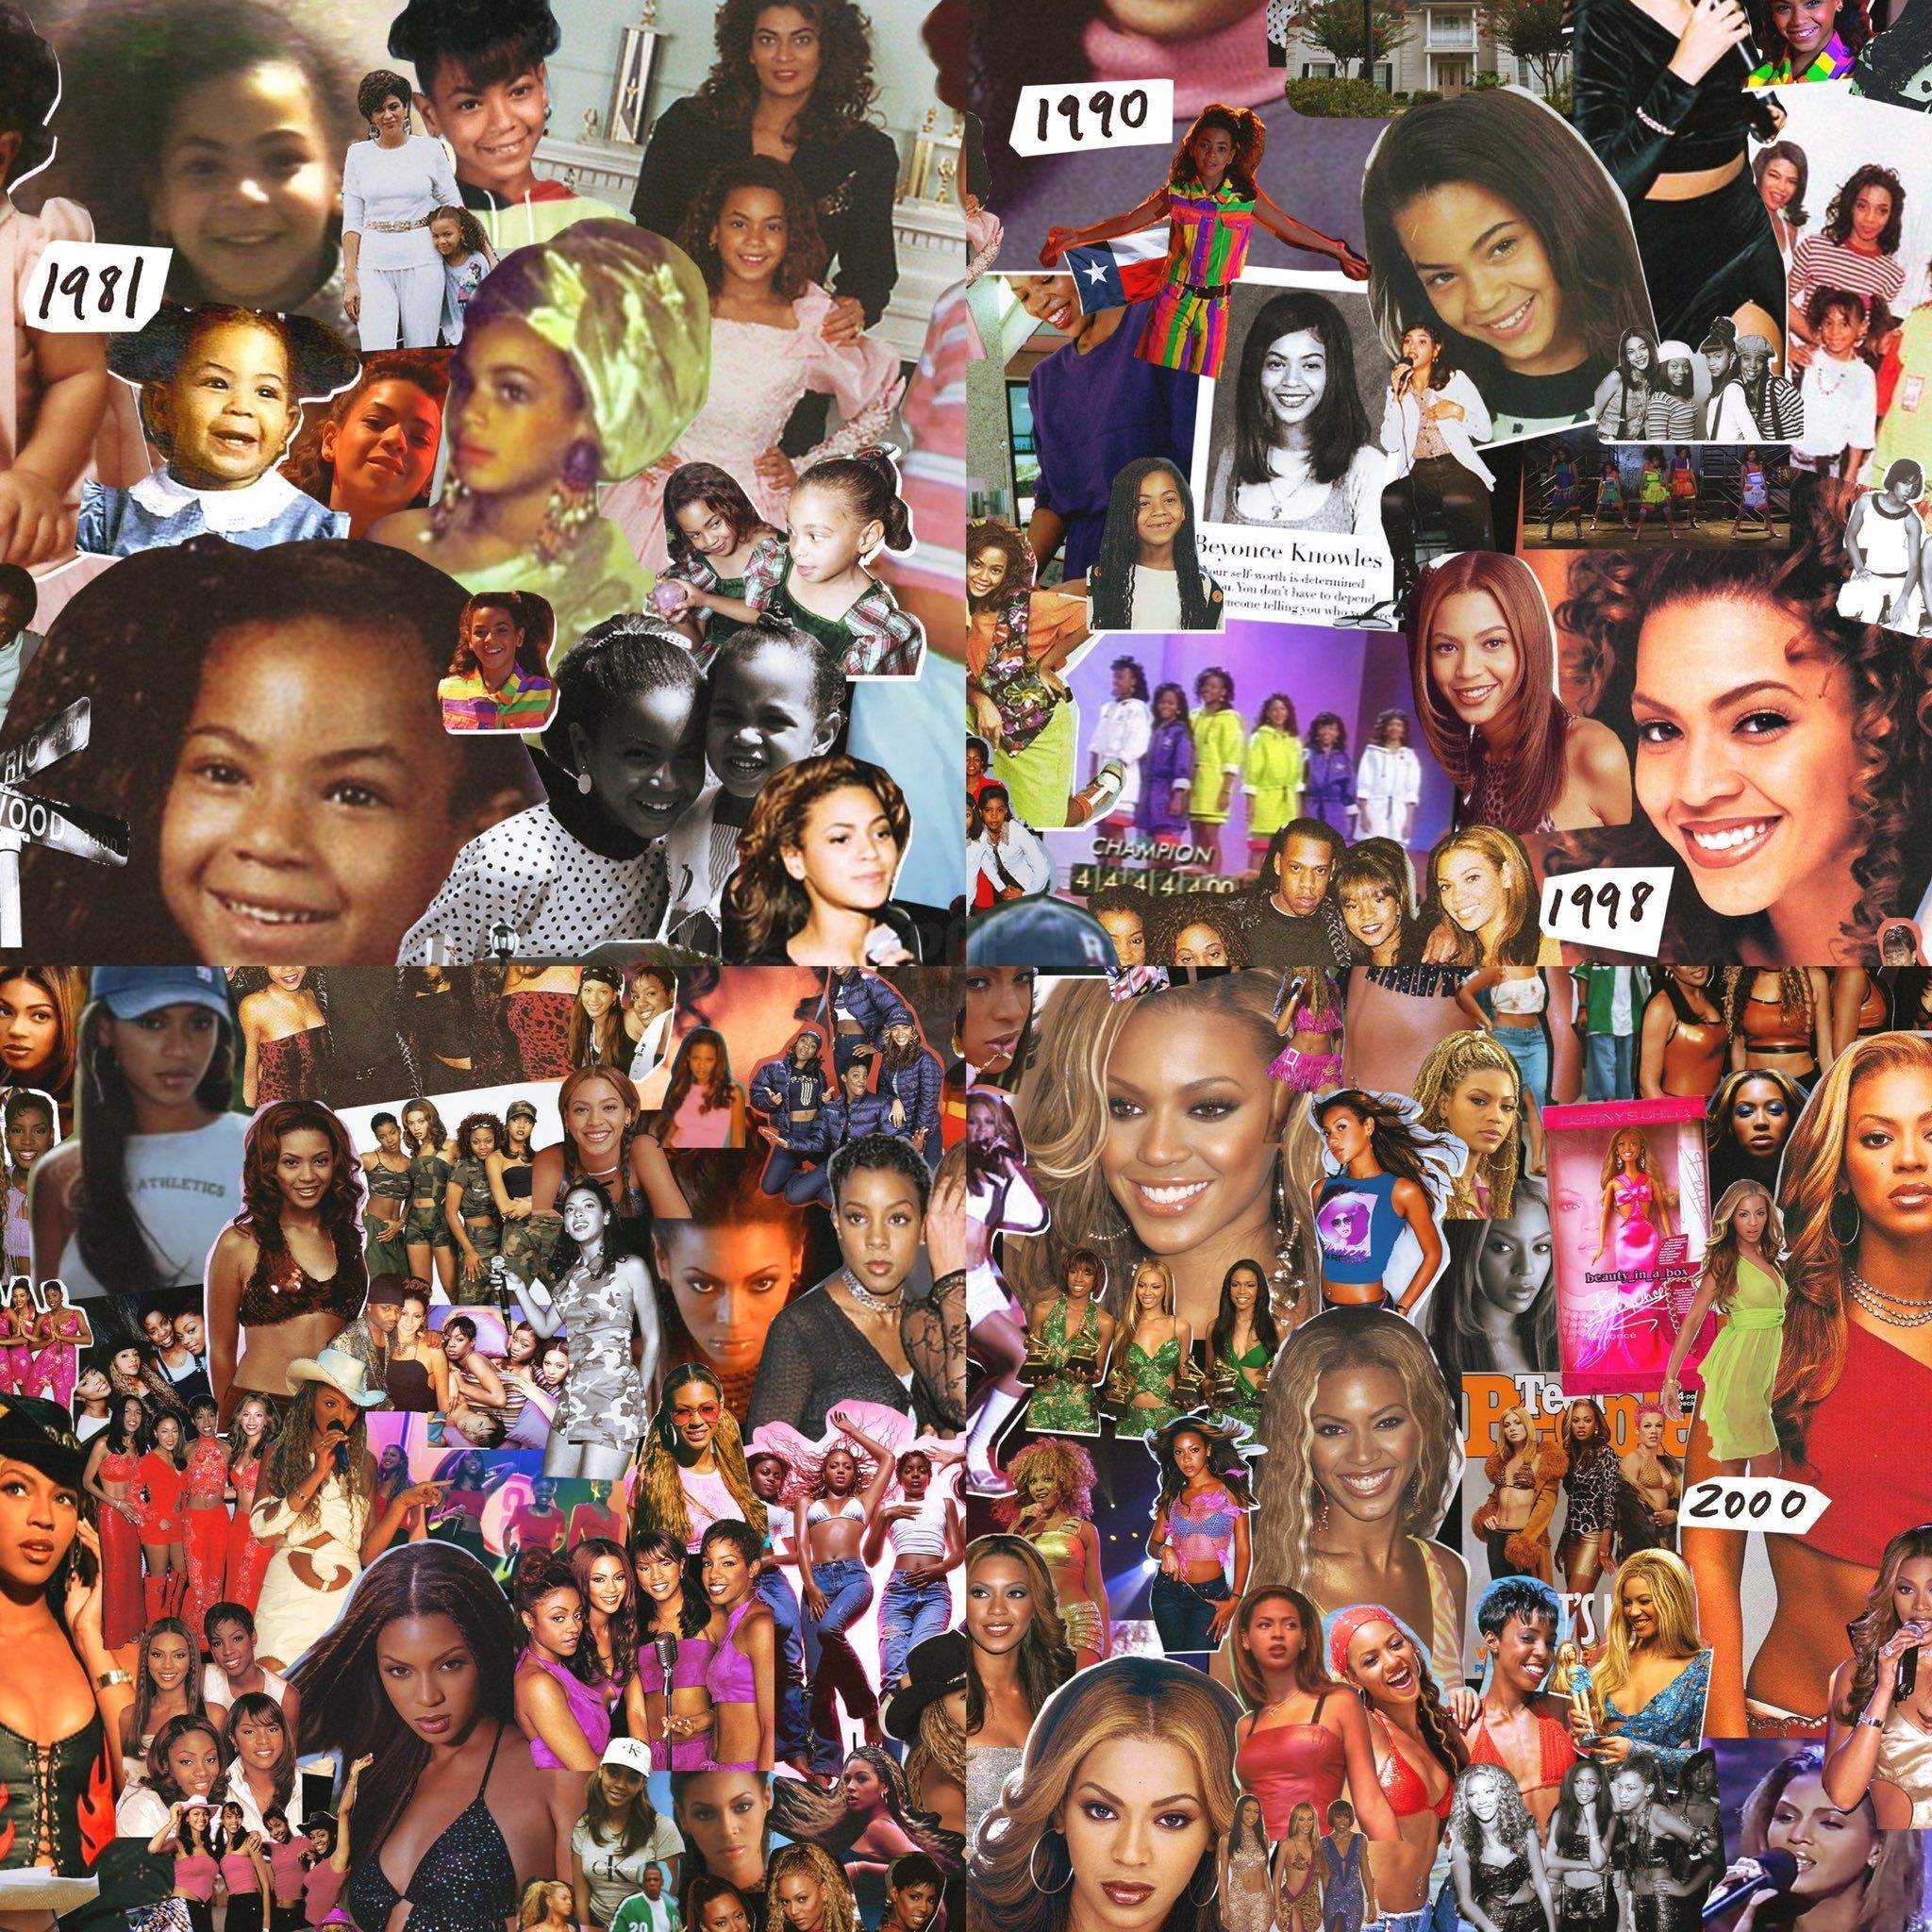 Pop Crave -. shares a timeline collage of her life in honor of her 40th birthday